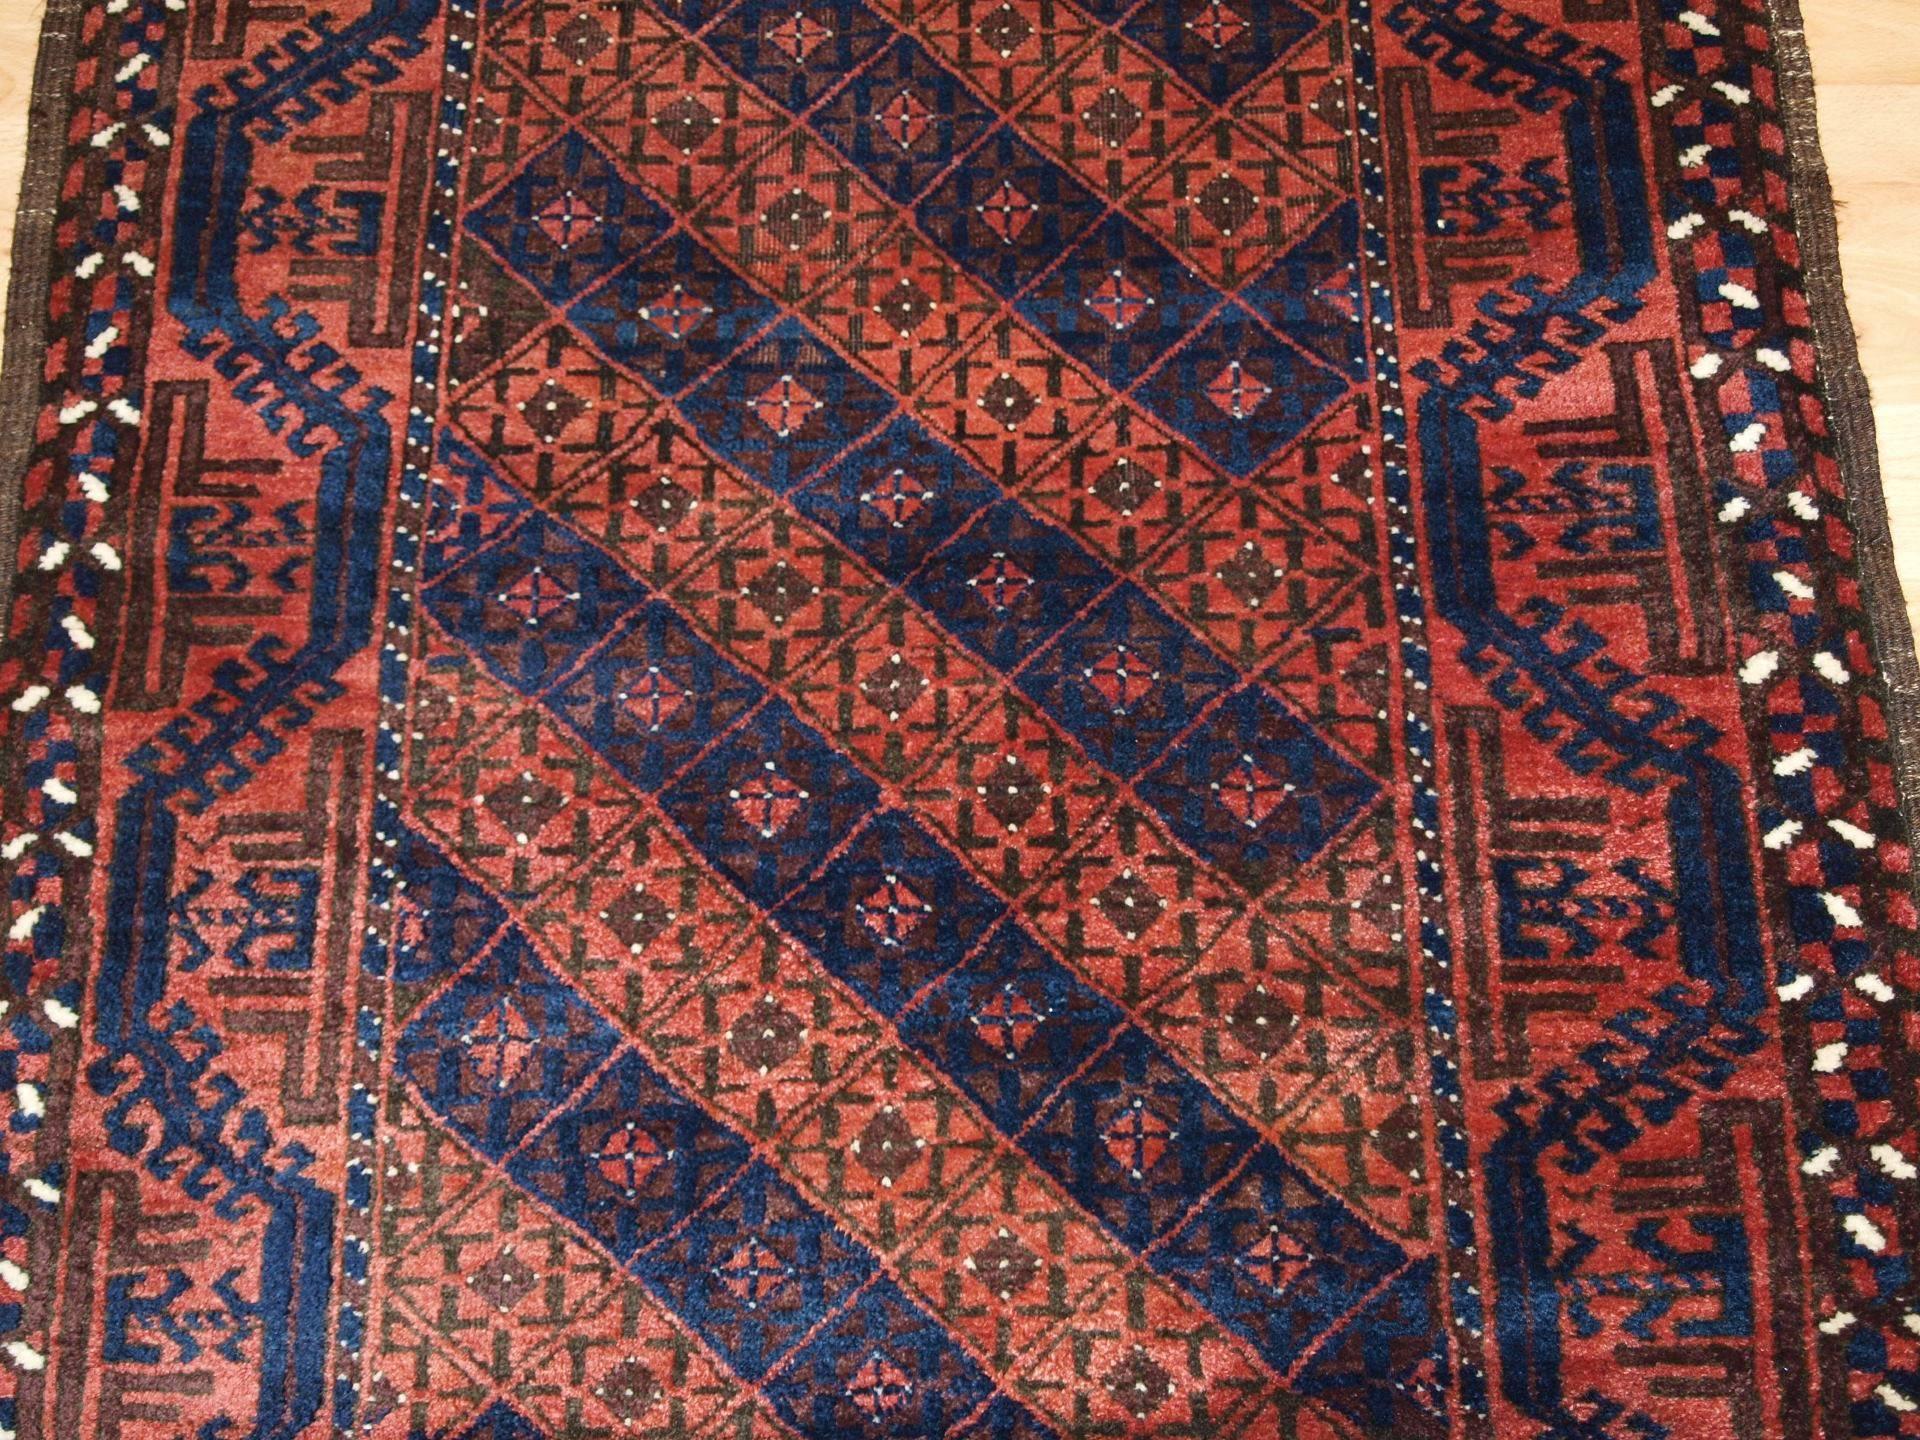 Wool Antique Persian Baluch Rug from Eastern Persia, circa 1900